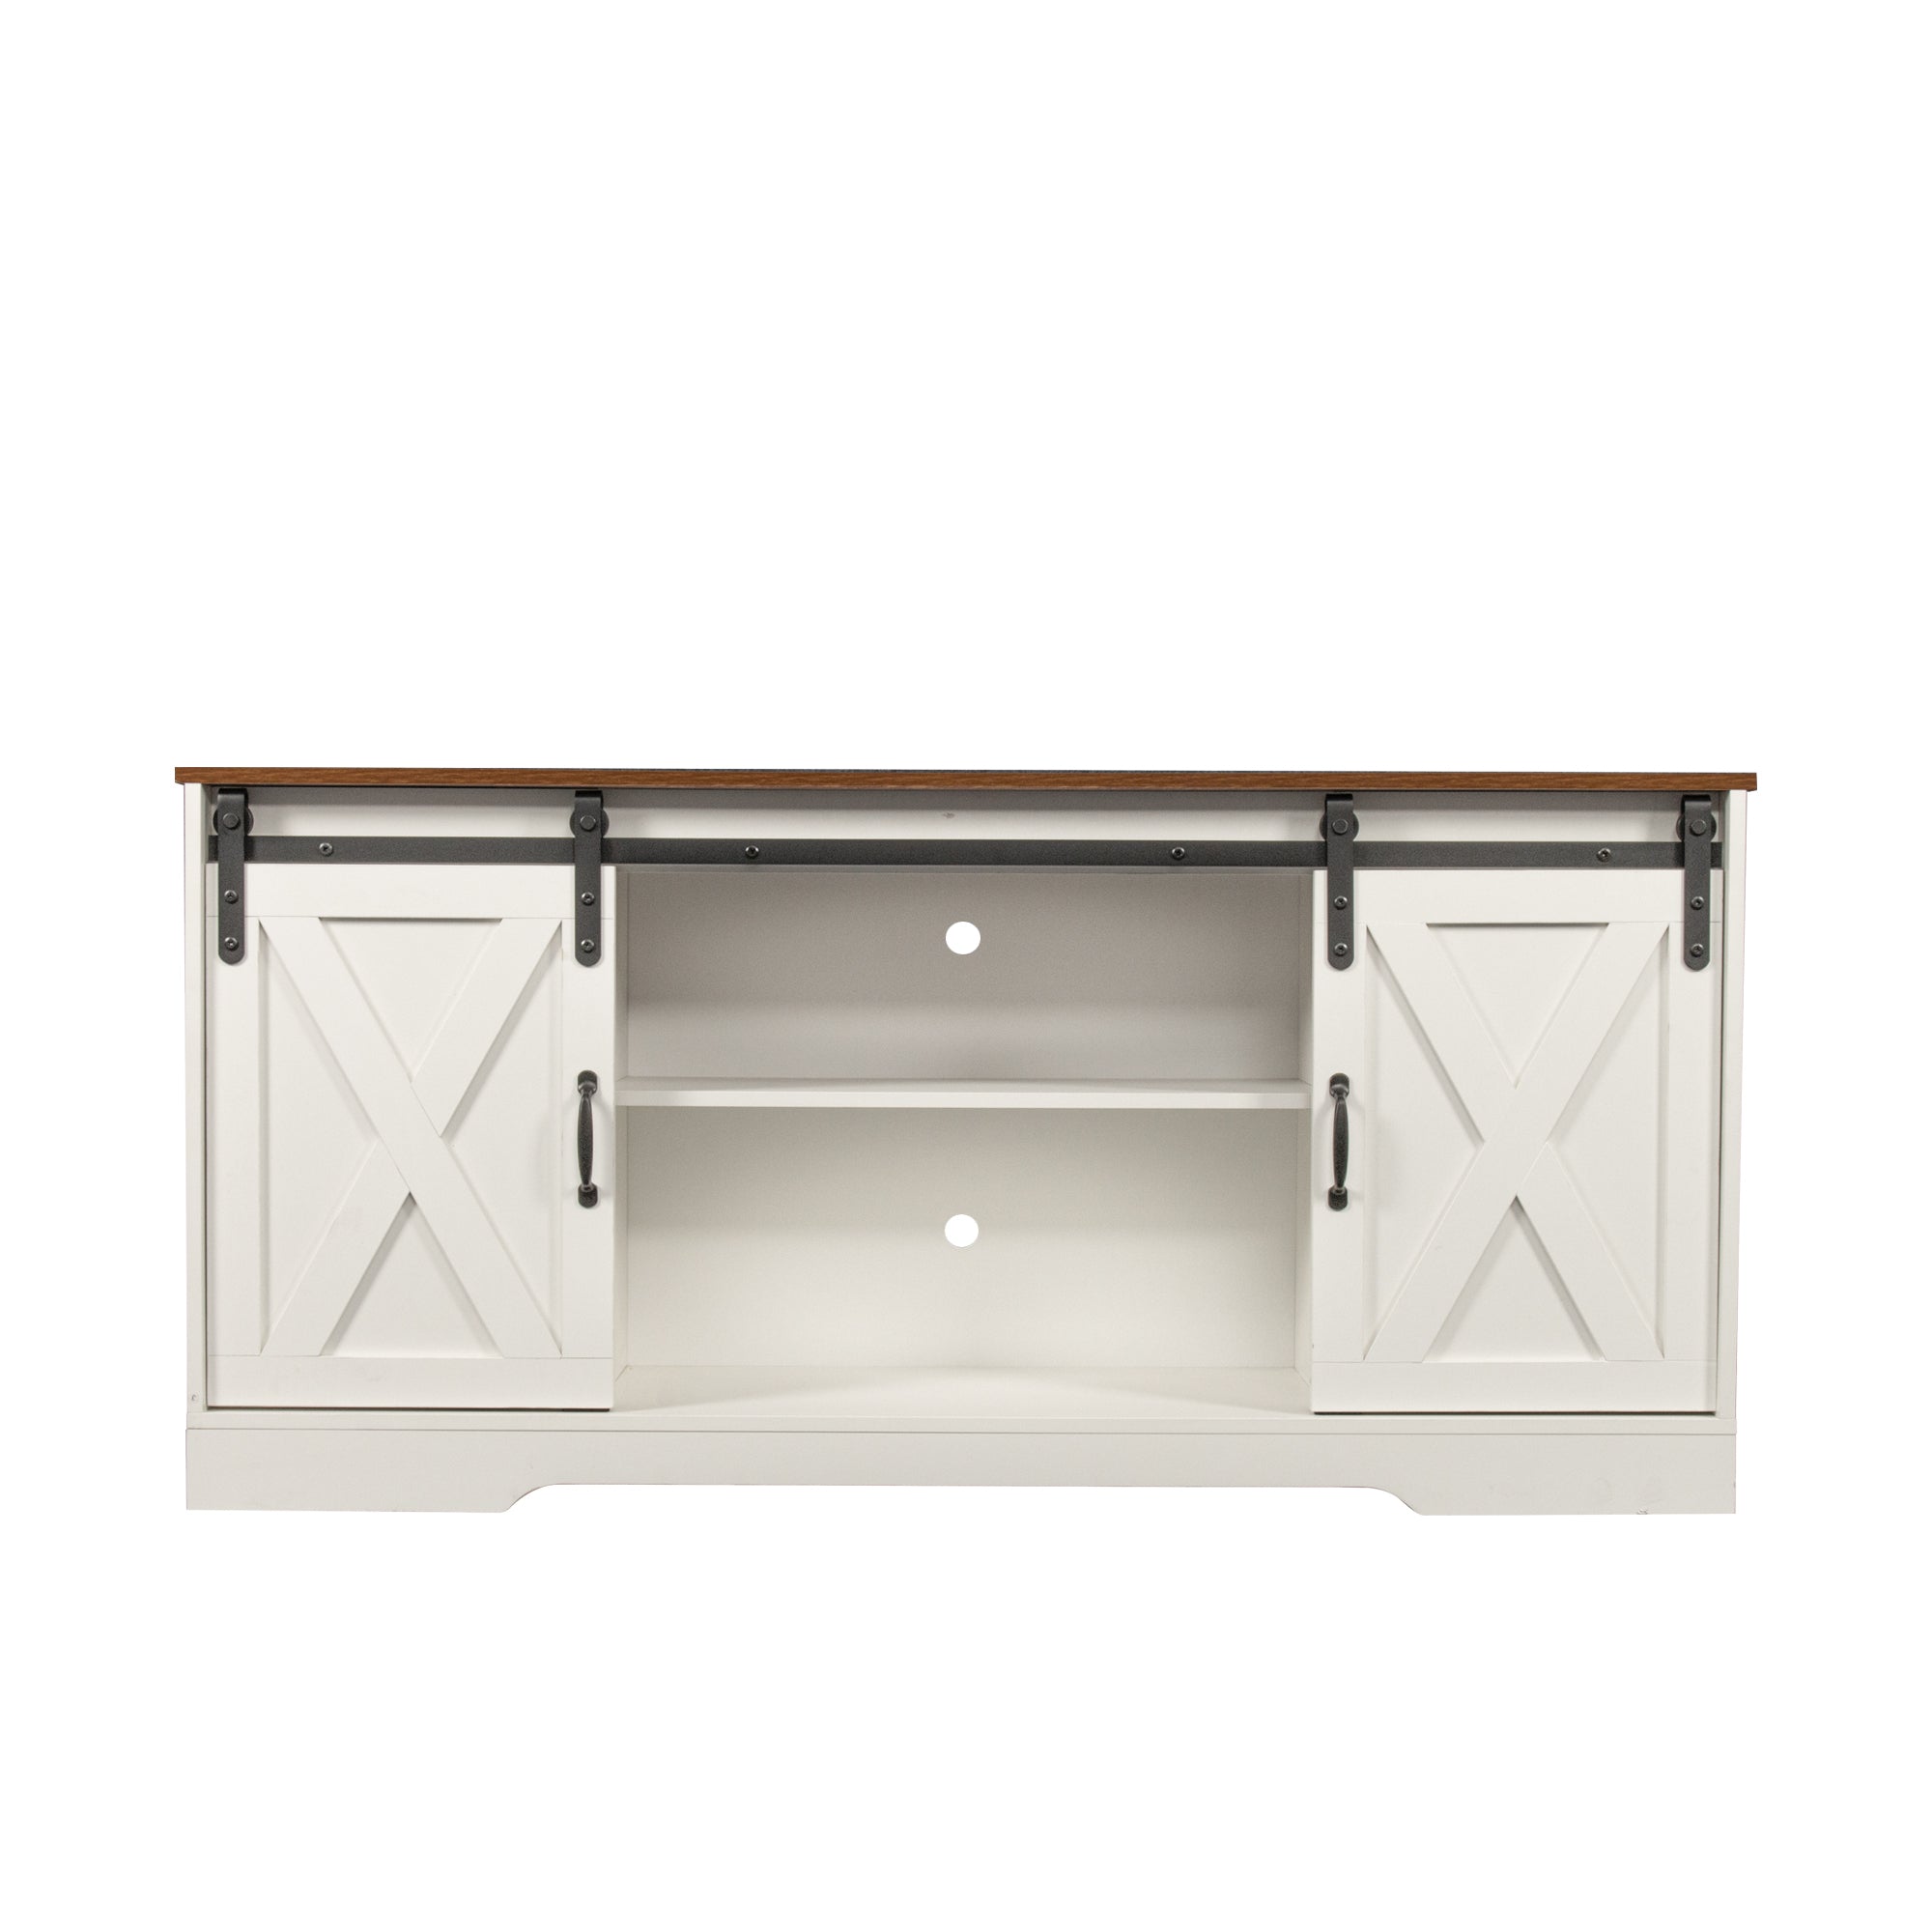 59" White Farmhouse TV Stand with Sliding Barn Door accommodate TVs up to 65"